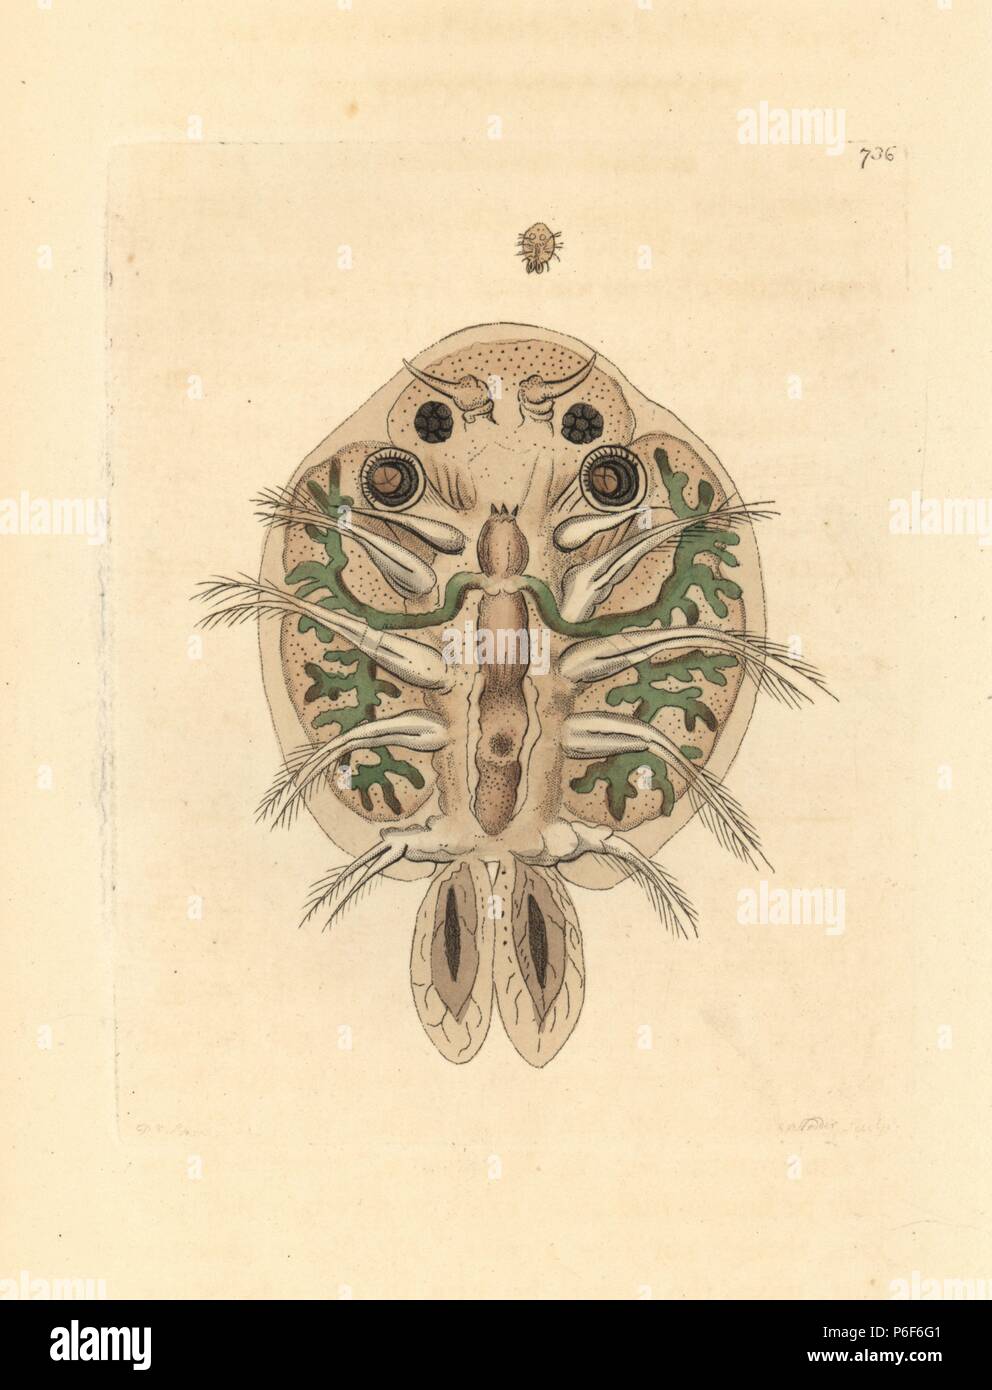 Water flea, Cyclops cyprinaceus, underside magnified under a microscope. Illustration drawn and engraved by Richard Polydore Nodder. Handcoloured copperplate engraving from George Shaw and Frederick Nodder's 'The Naturalist's Miscellany,' London, 1805. Stock Photo